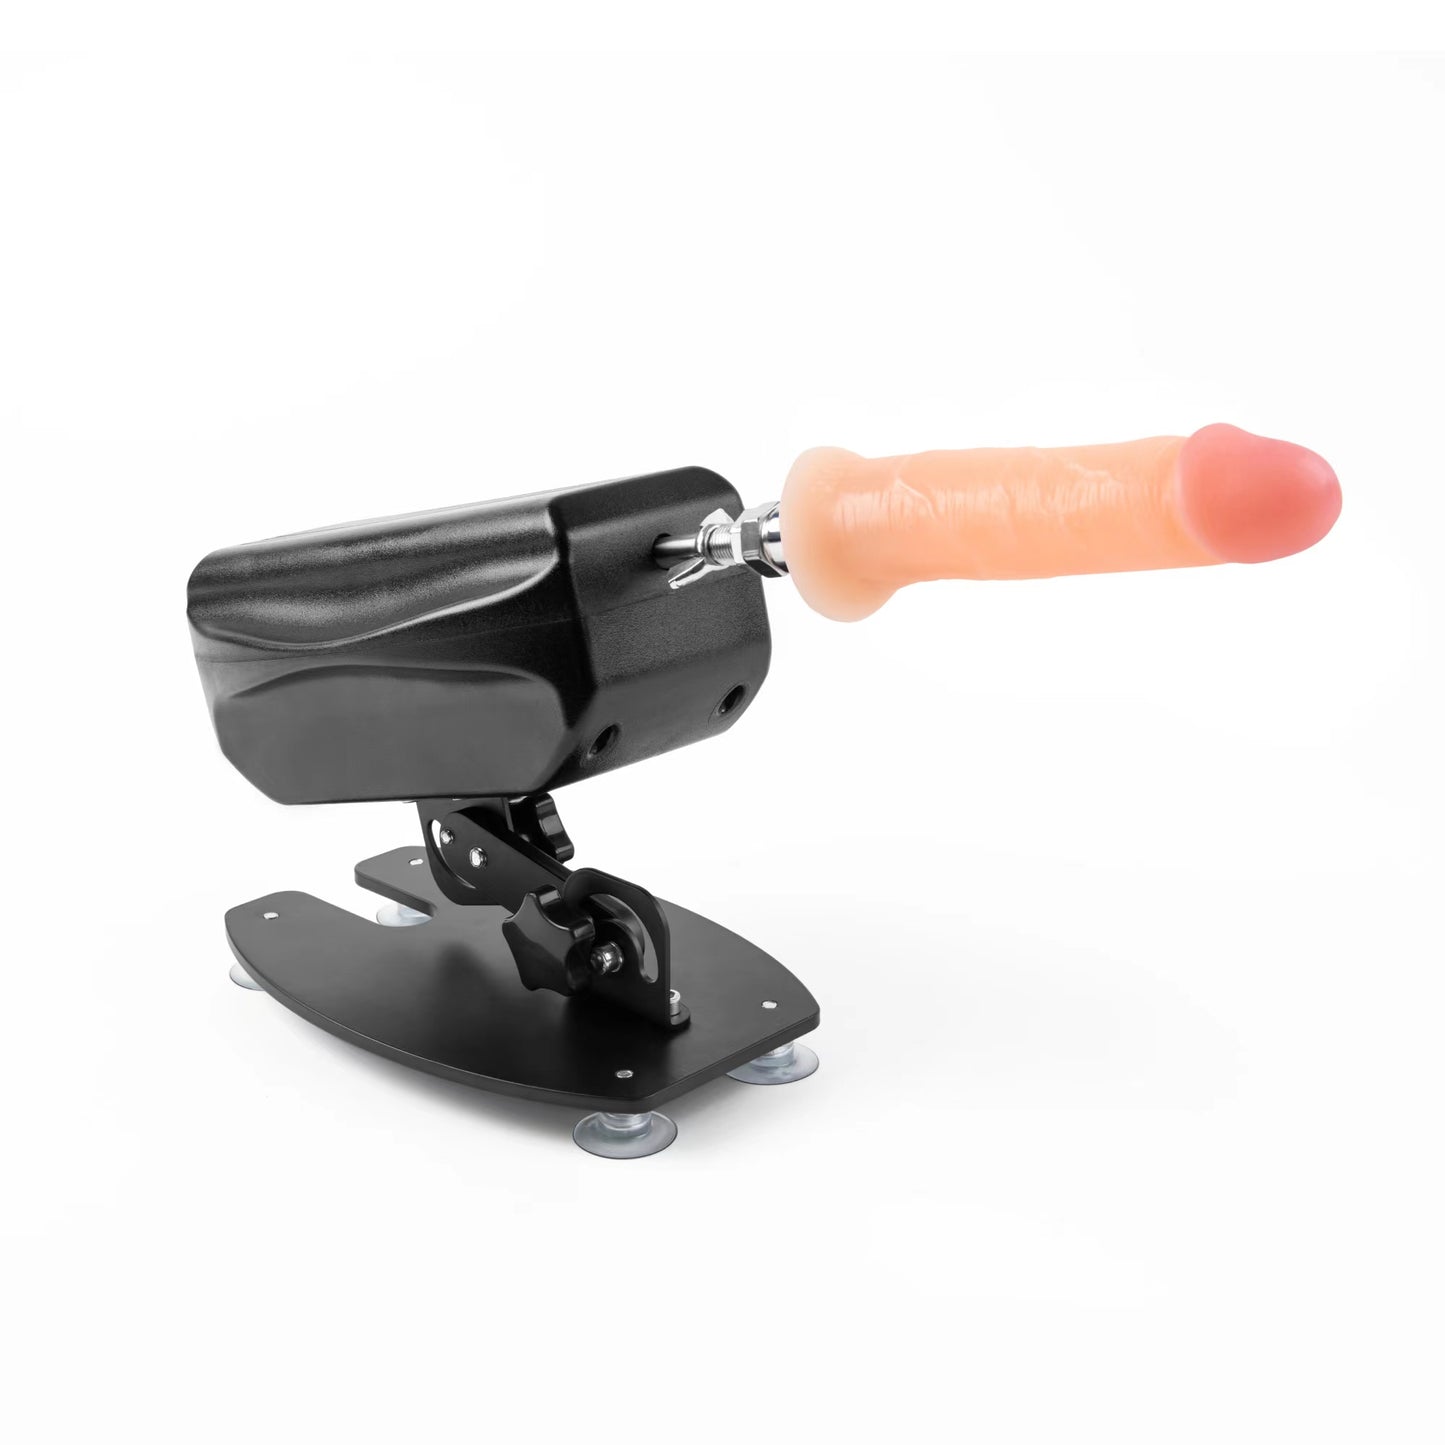 Remote Control Sex Machine - Wireless - Works from 50 feet away - Custom Realistic Dildo Attachment Included